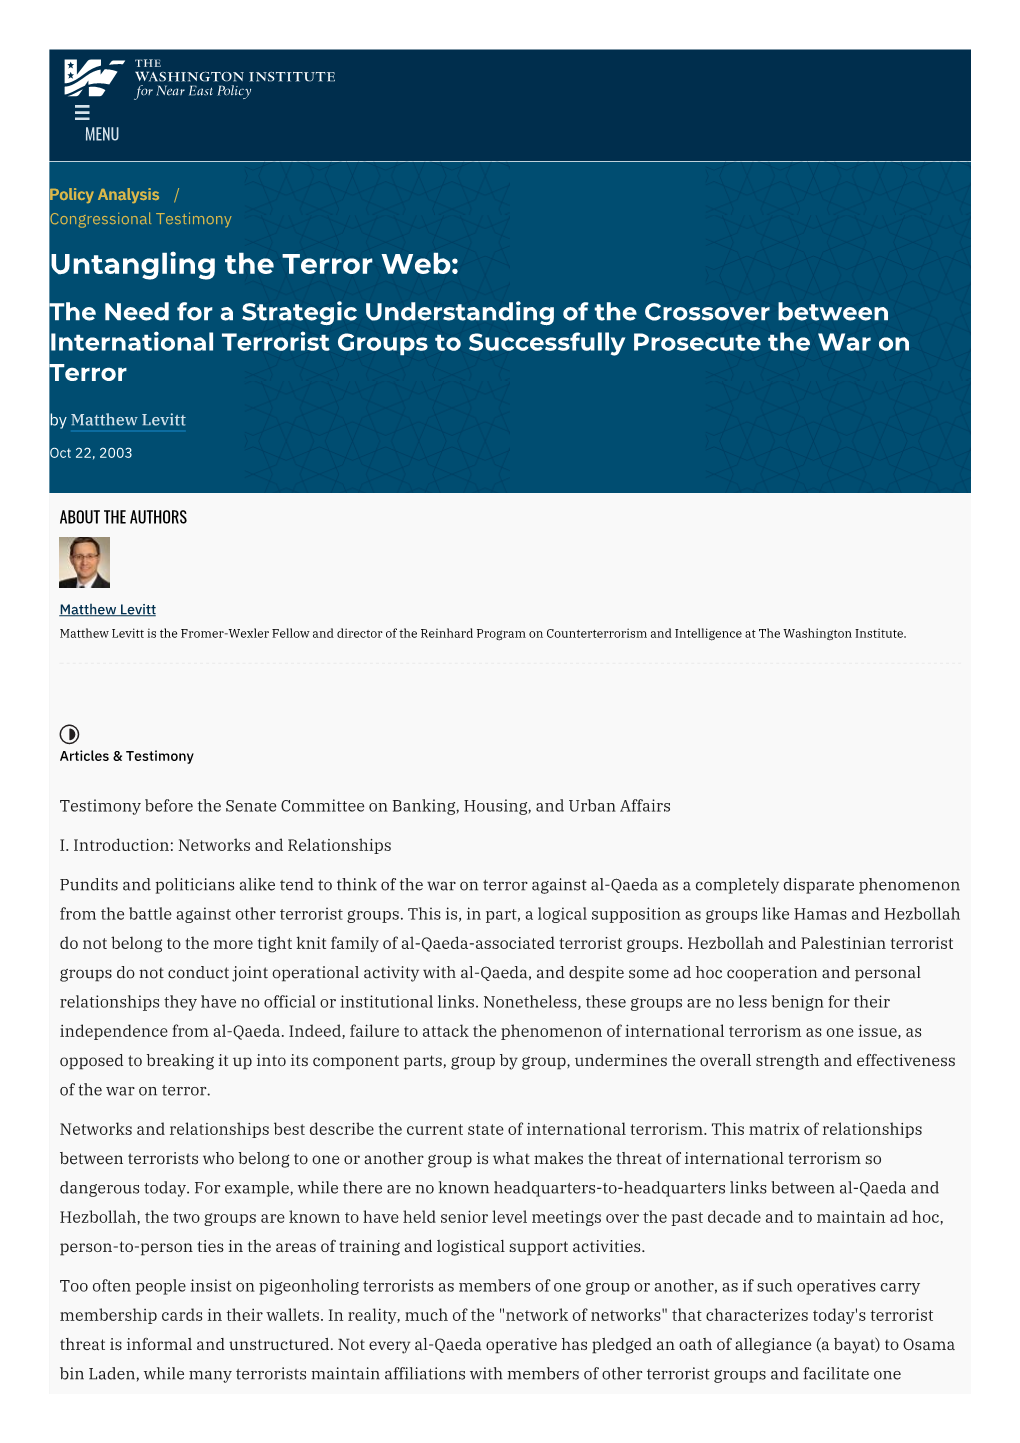 Untangling the Terror Web: the Need for a Strategic Understanding of The